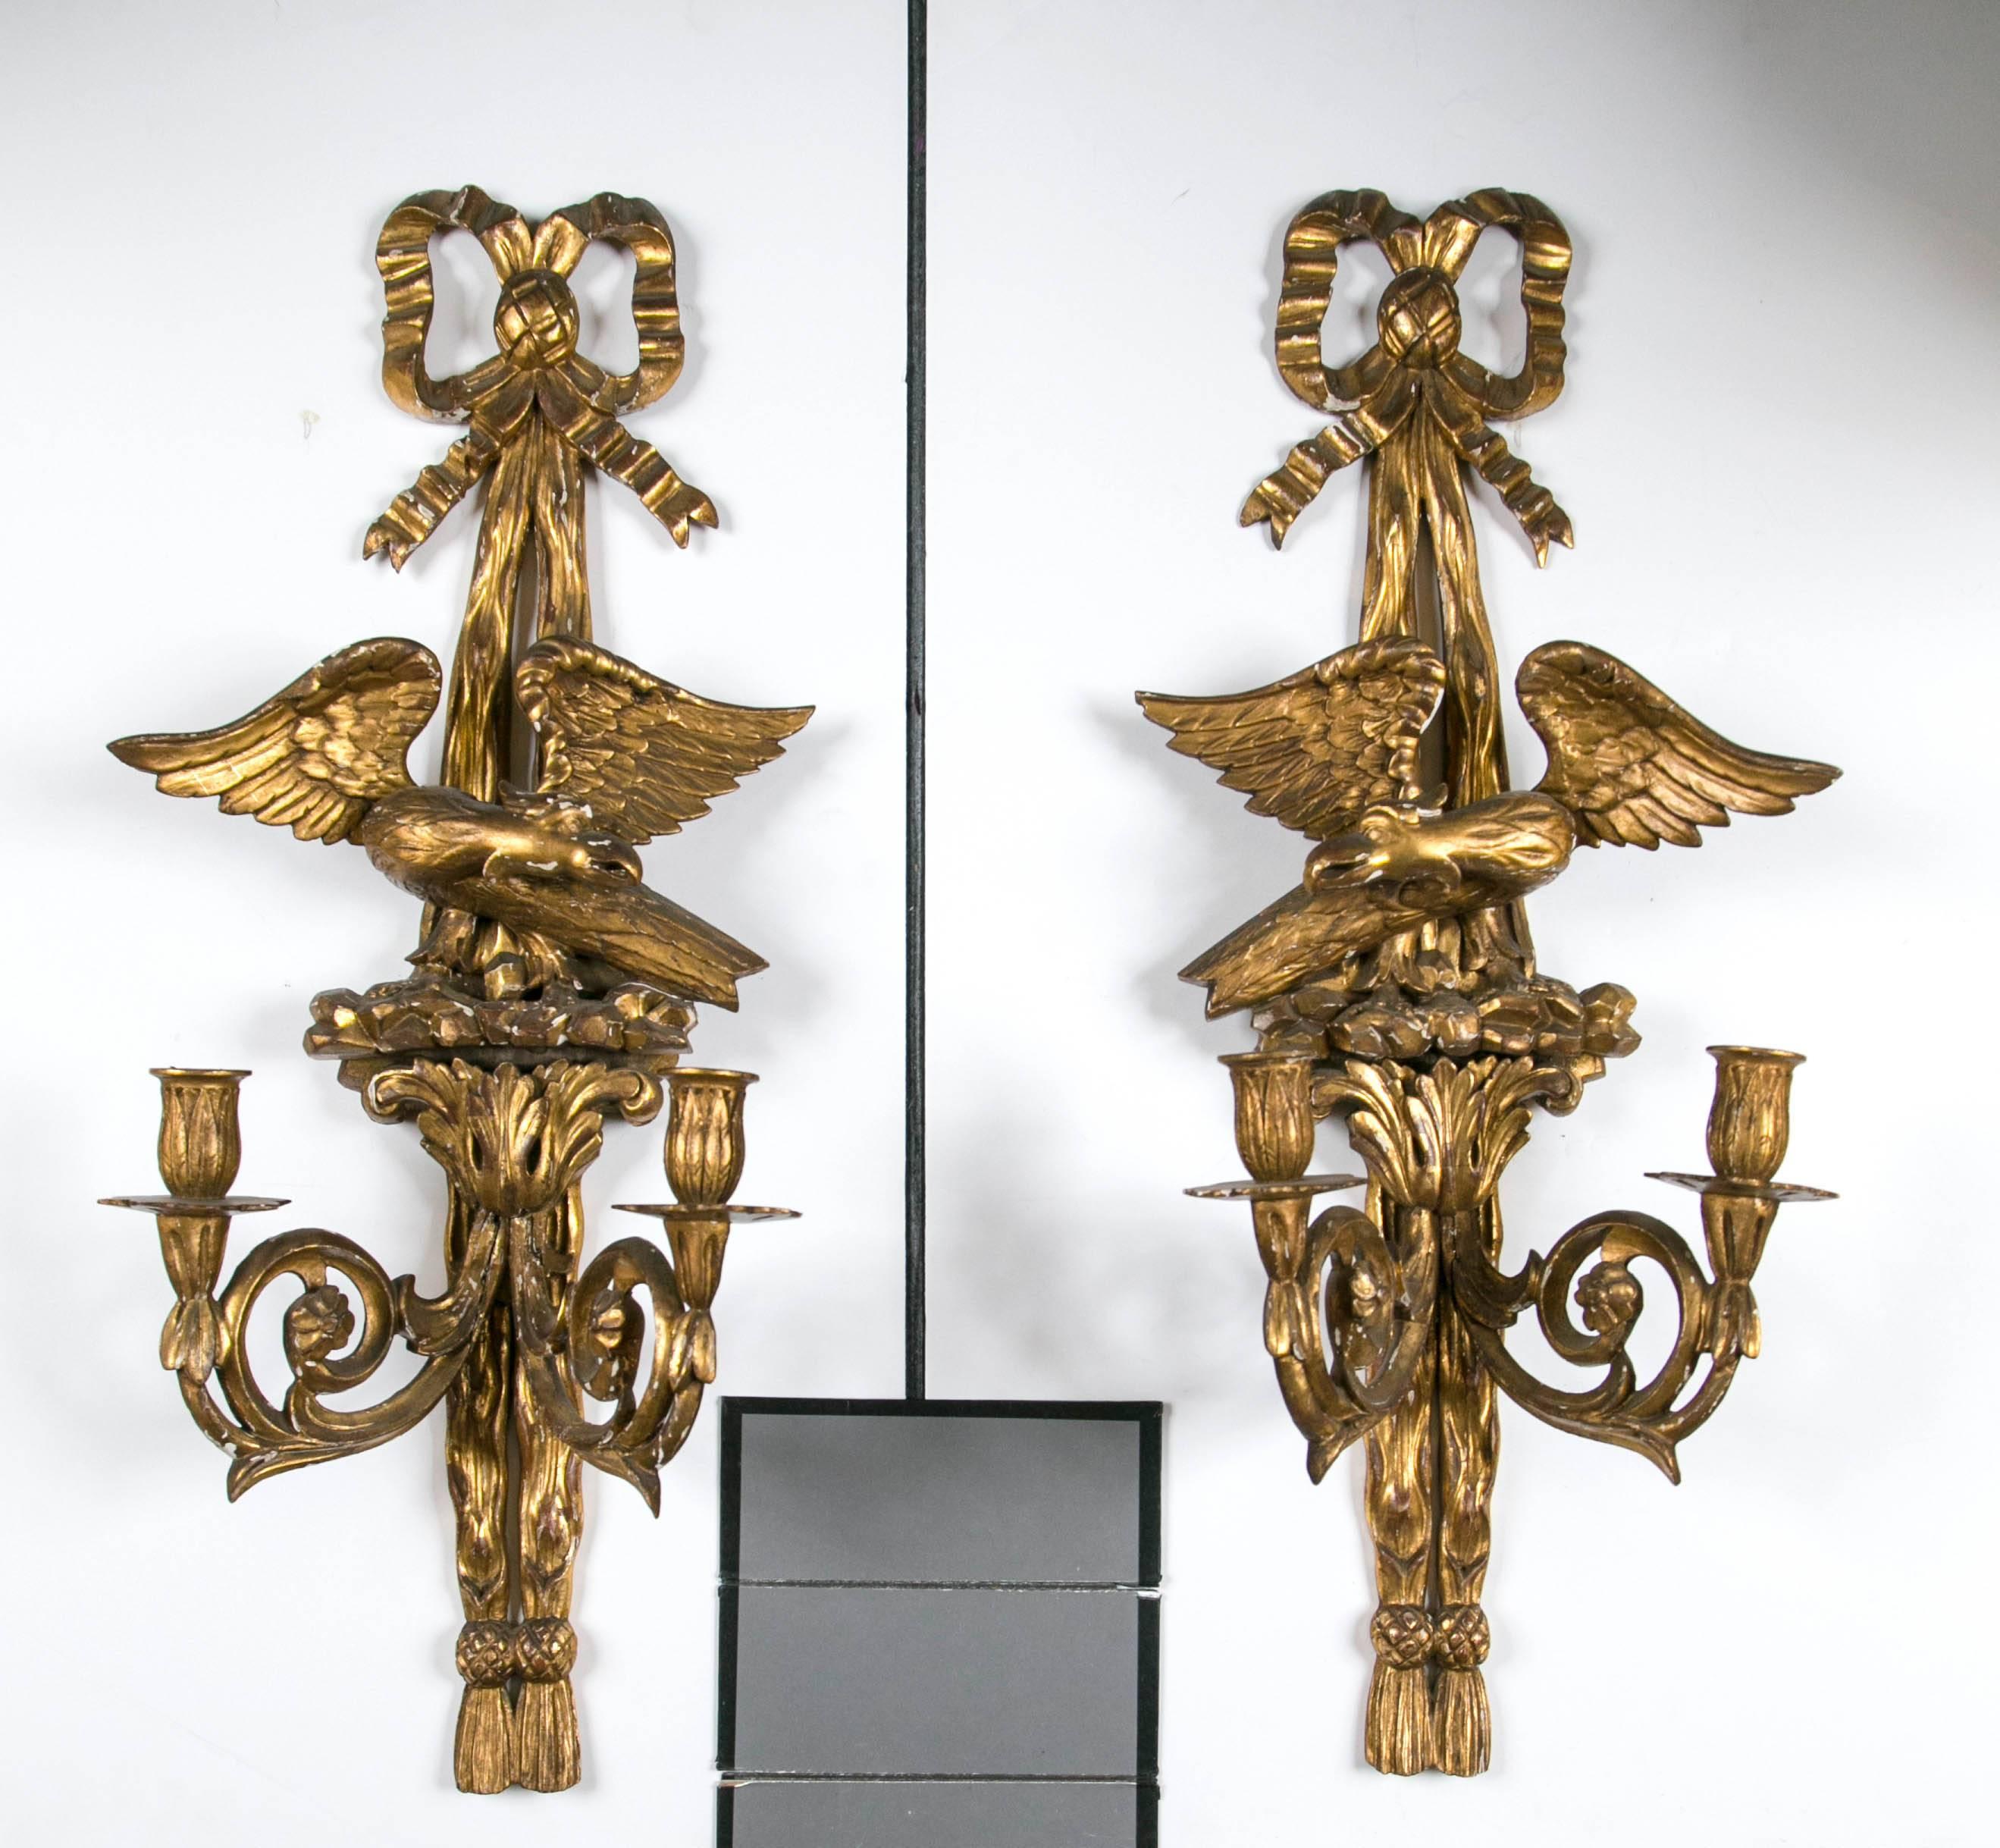 A wonderful pair of giltwood sconces topped with a Louis XVI style bow above an eagle with spread wings sitting on a rocky outcropping. The eagles are a true pair, one facing left, one facing right. Below is a scrolling acanthus leaf capital with